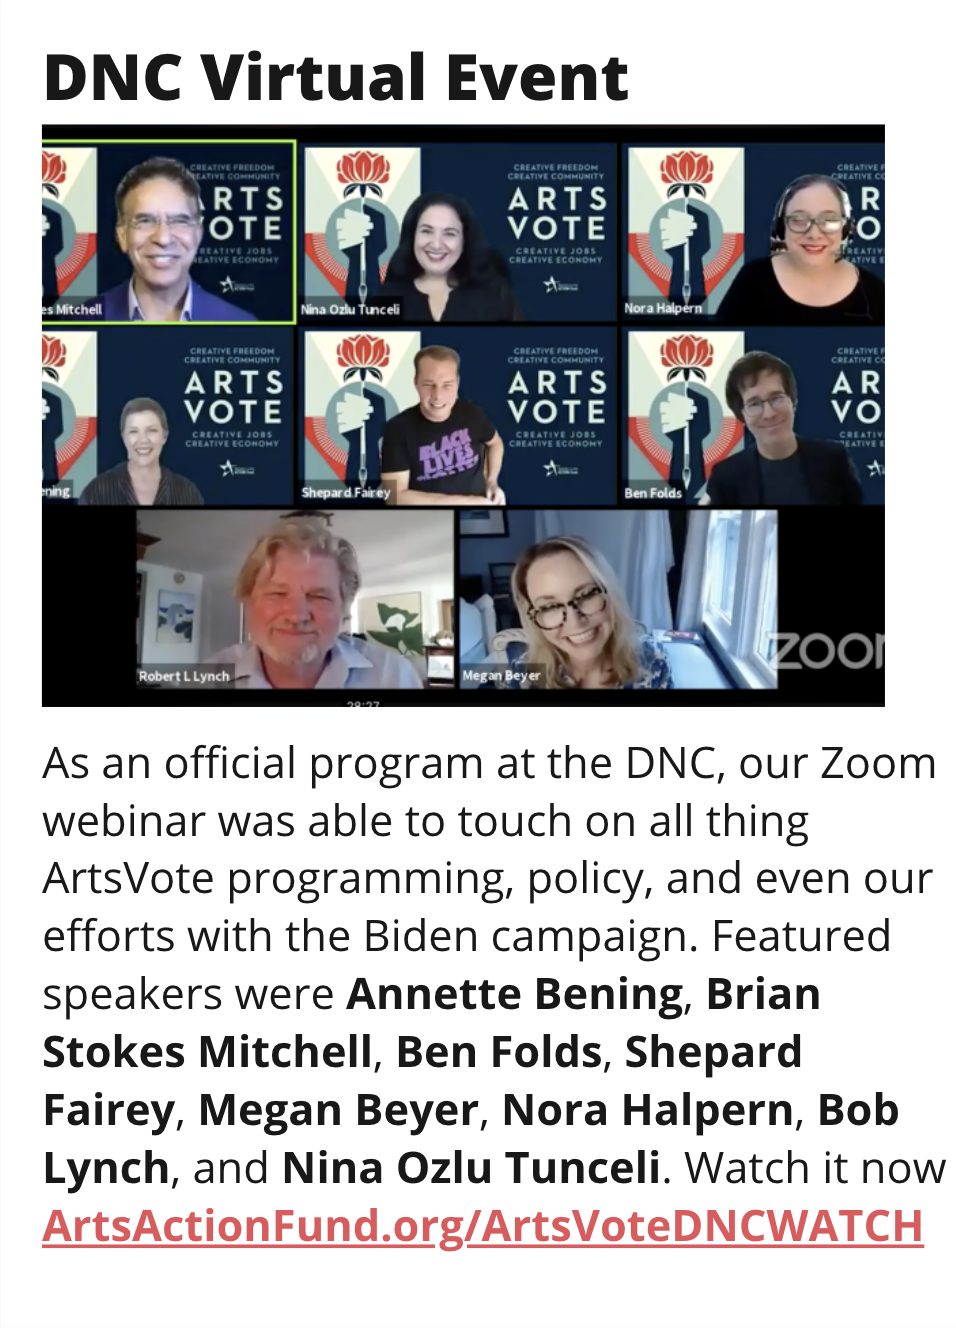 TITLE: DNC Virtual Event IMAGE: Zoom Gallery view of all speakers from the DNC event STORY: As an official program at the DNC, our Zoom webinar was able to touch on all thing ArtsVote programming, policy, and even our efforts with the Biden campaign. Featured speakers were Annette Bening, Brian Stokes Mitchell, Ben Folds, Shepard Fairey, Megan Beyer, Nora Halpern, Bob Lynch, and Nina Ozlu Tunceli. Watch it now ArtsActionFund.org/ArtsVoteDNCWATCH